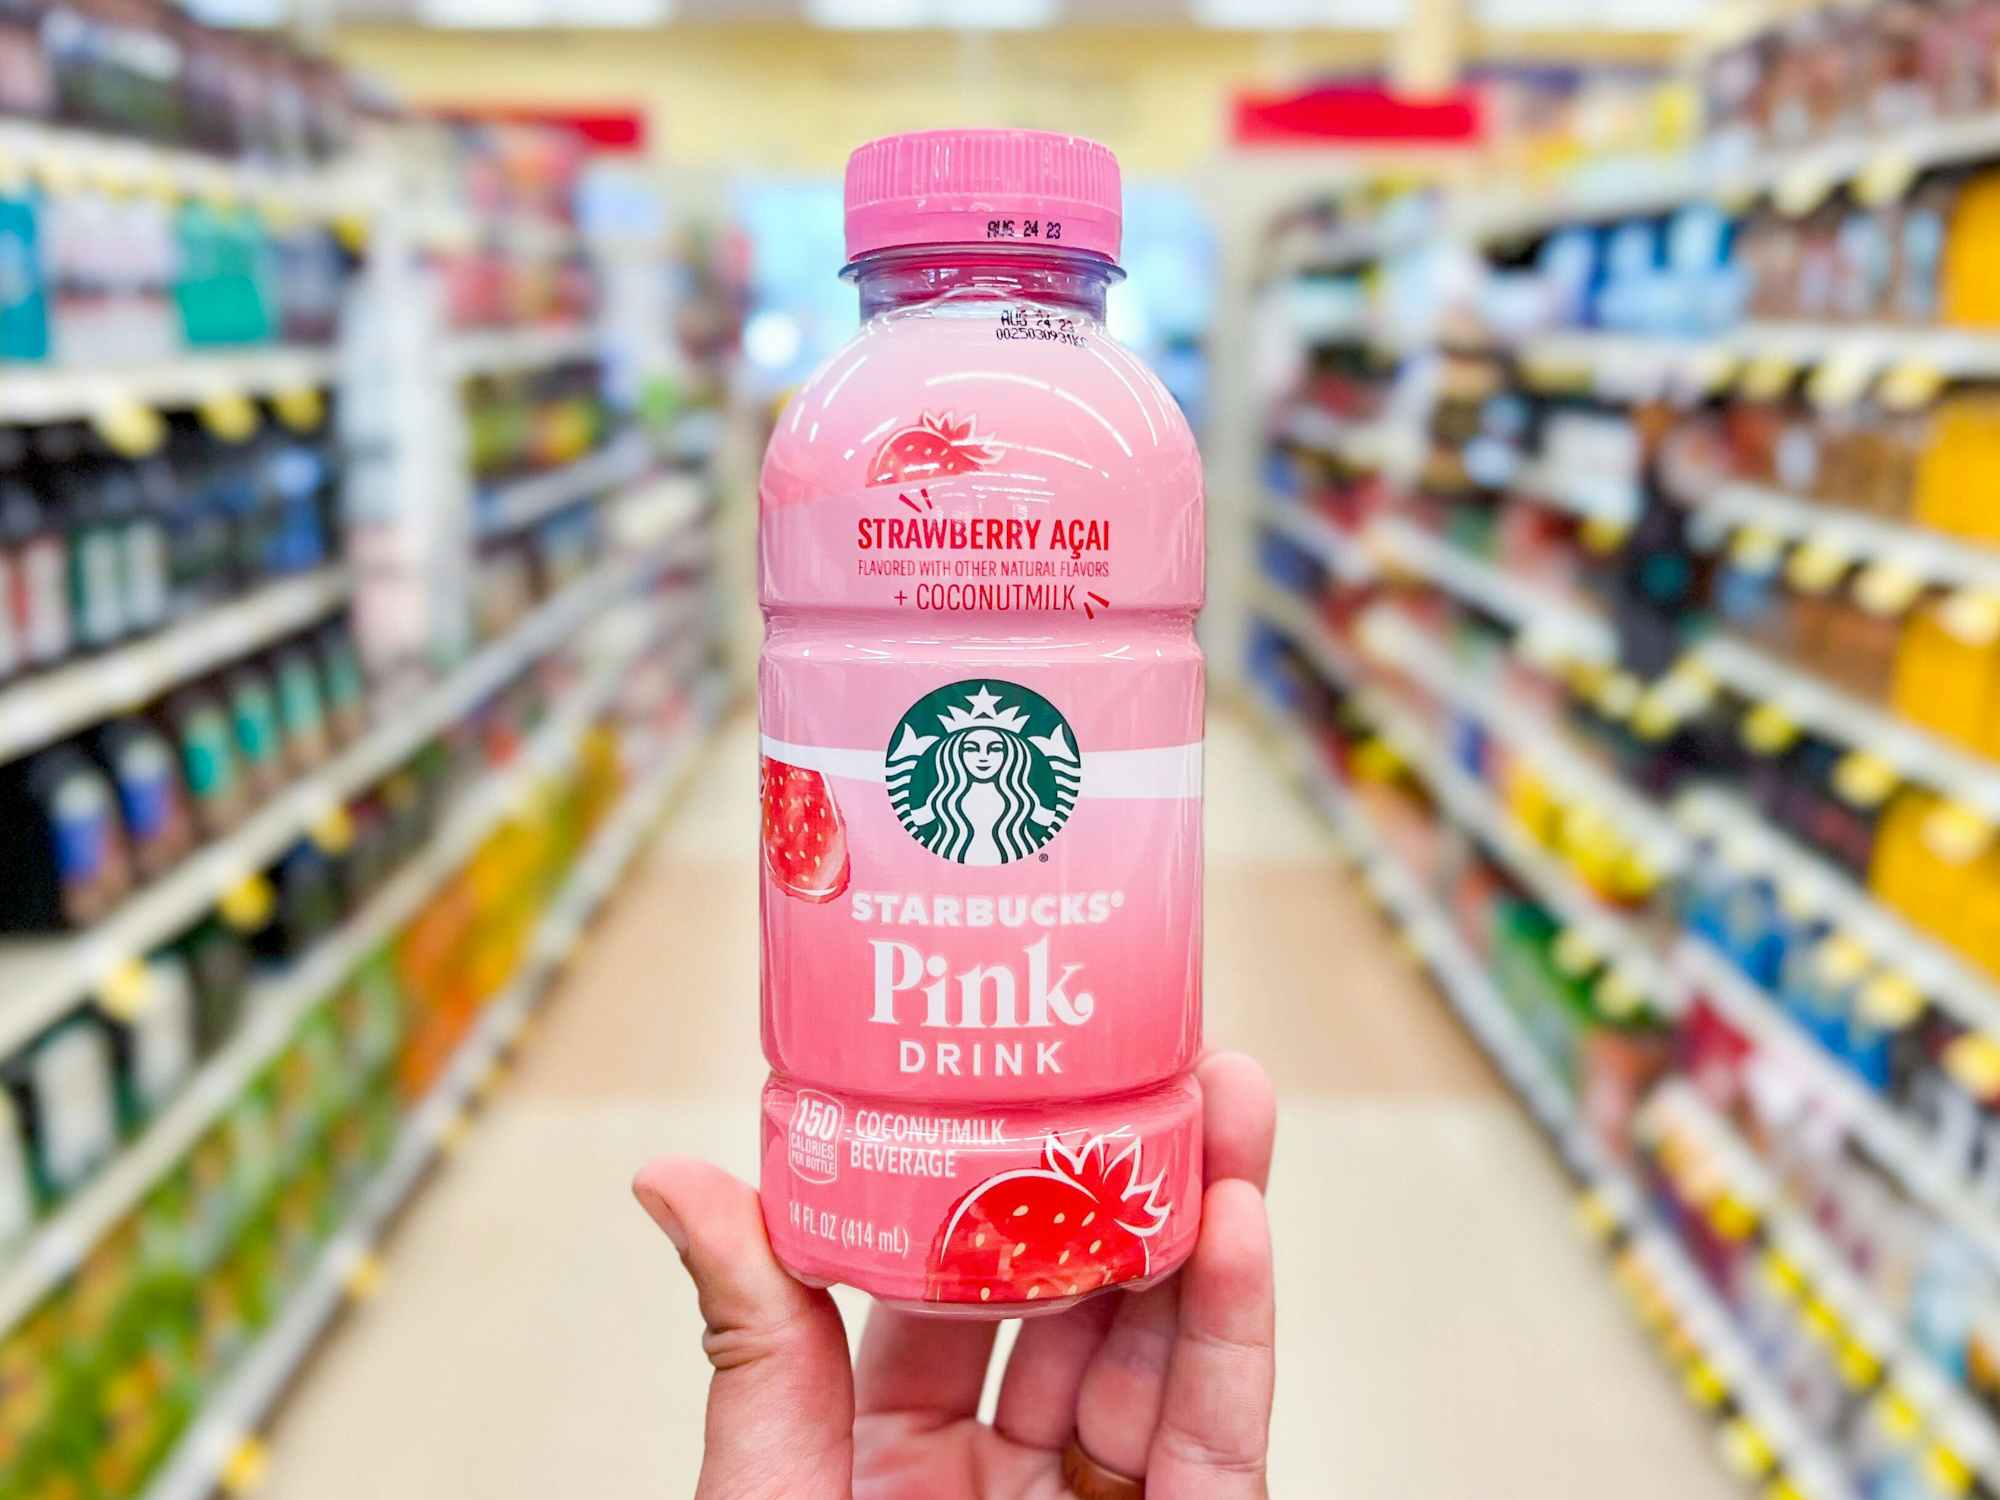 Someone holding a Starbucks bottled Pink Drink in an aisle at a grocery store